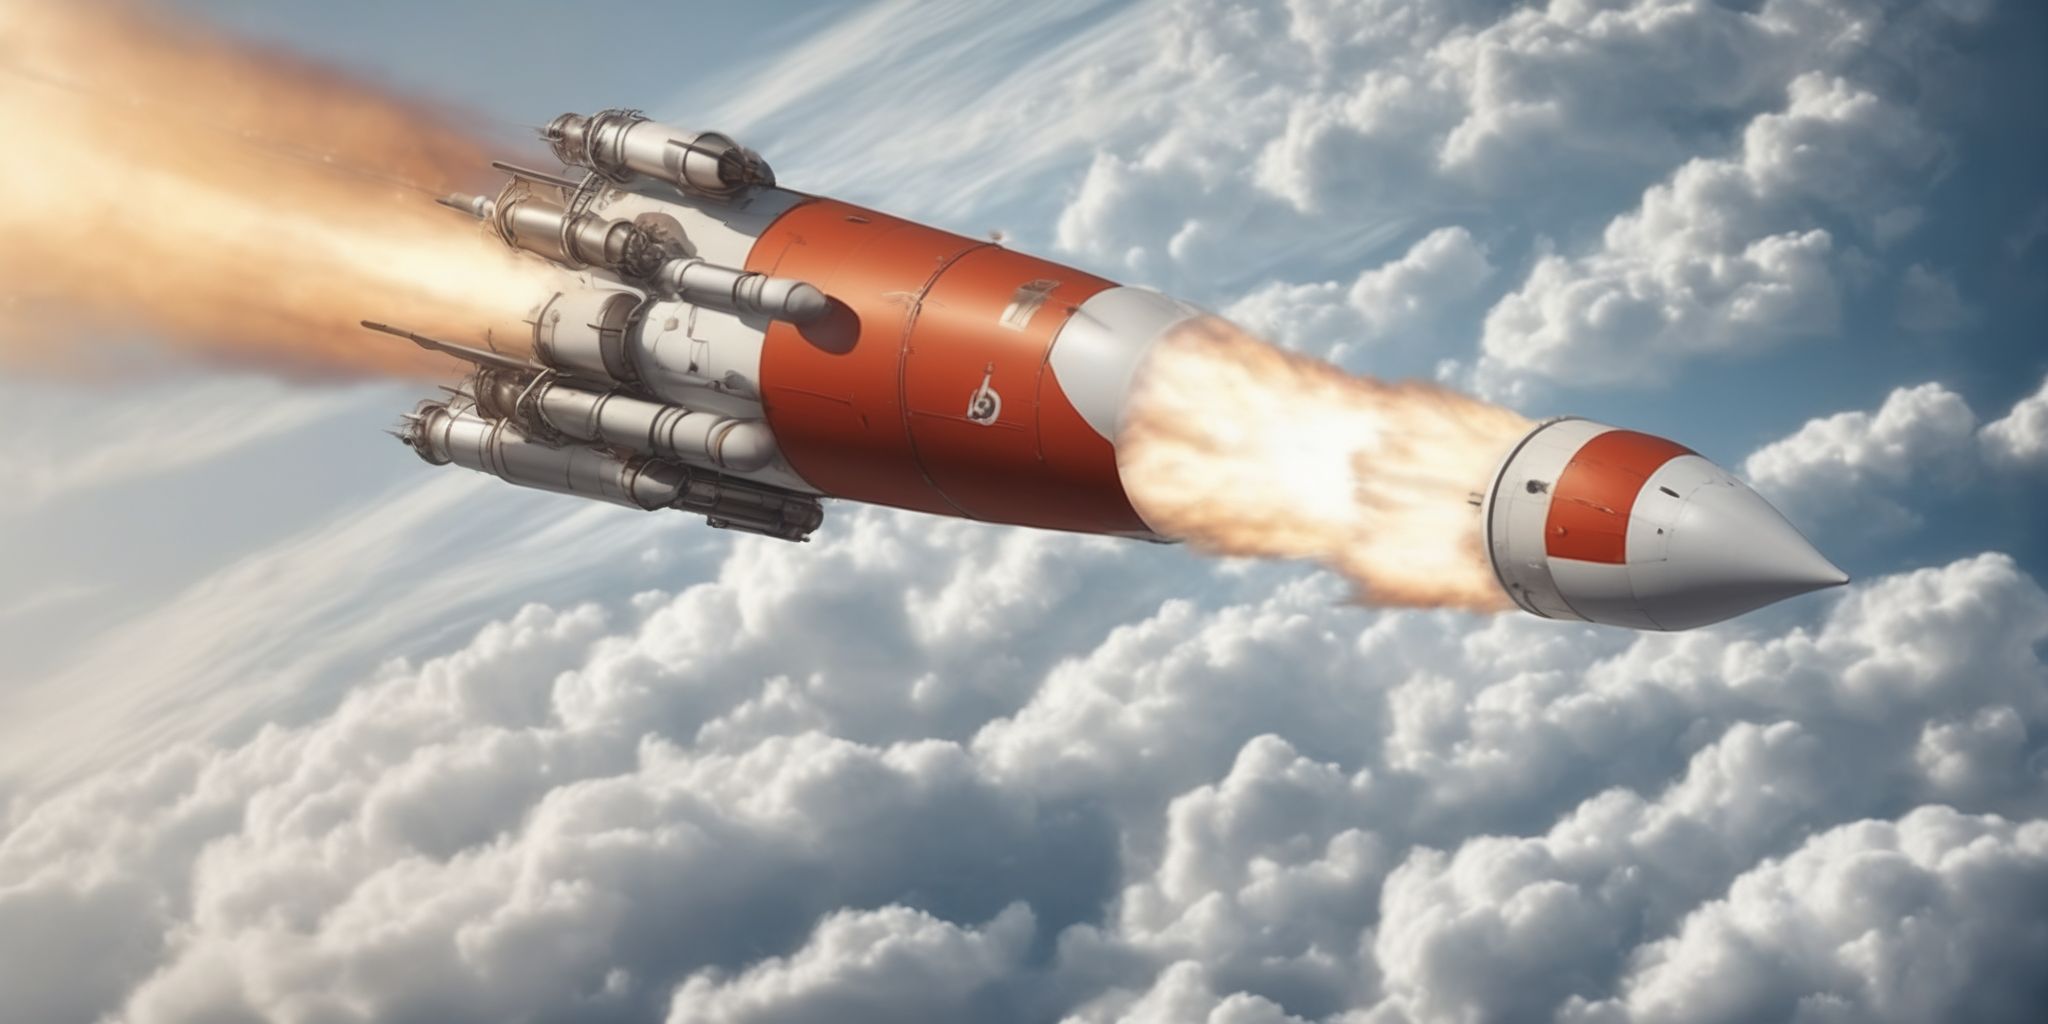 Rocket  in realistic, photographic style